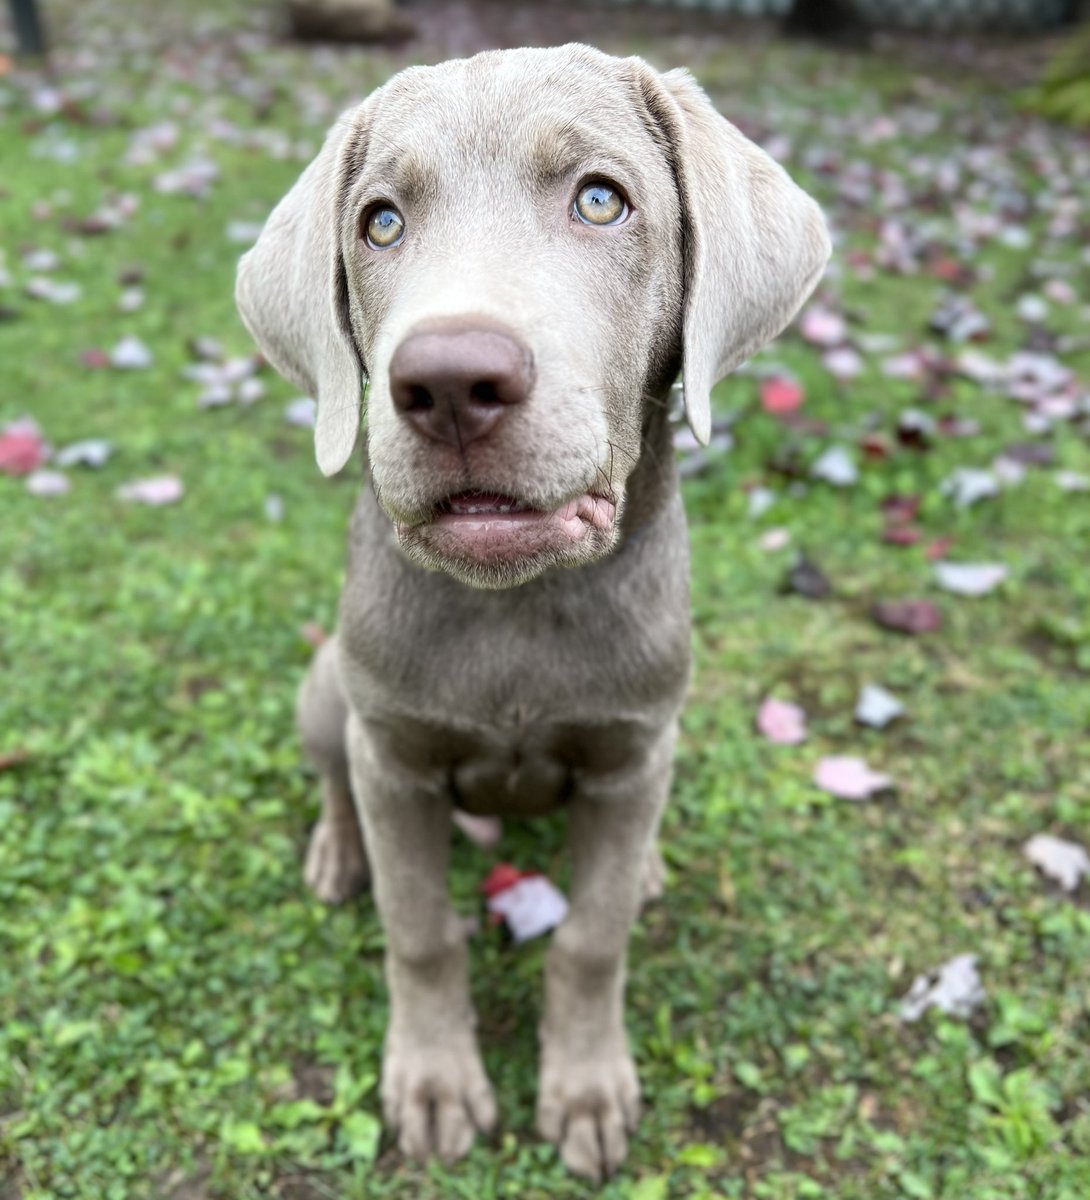 🩶🦈🦷 Here’s the little landshark today! His eyes are so pretty, and he’s so handsome, but wow can he bite!!!!! 😂🦷🦈
#landshark #puppiesoftwitter #cutepuppies #silverlab #puppiesofX #dogsoftwitter #dogs